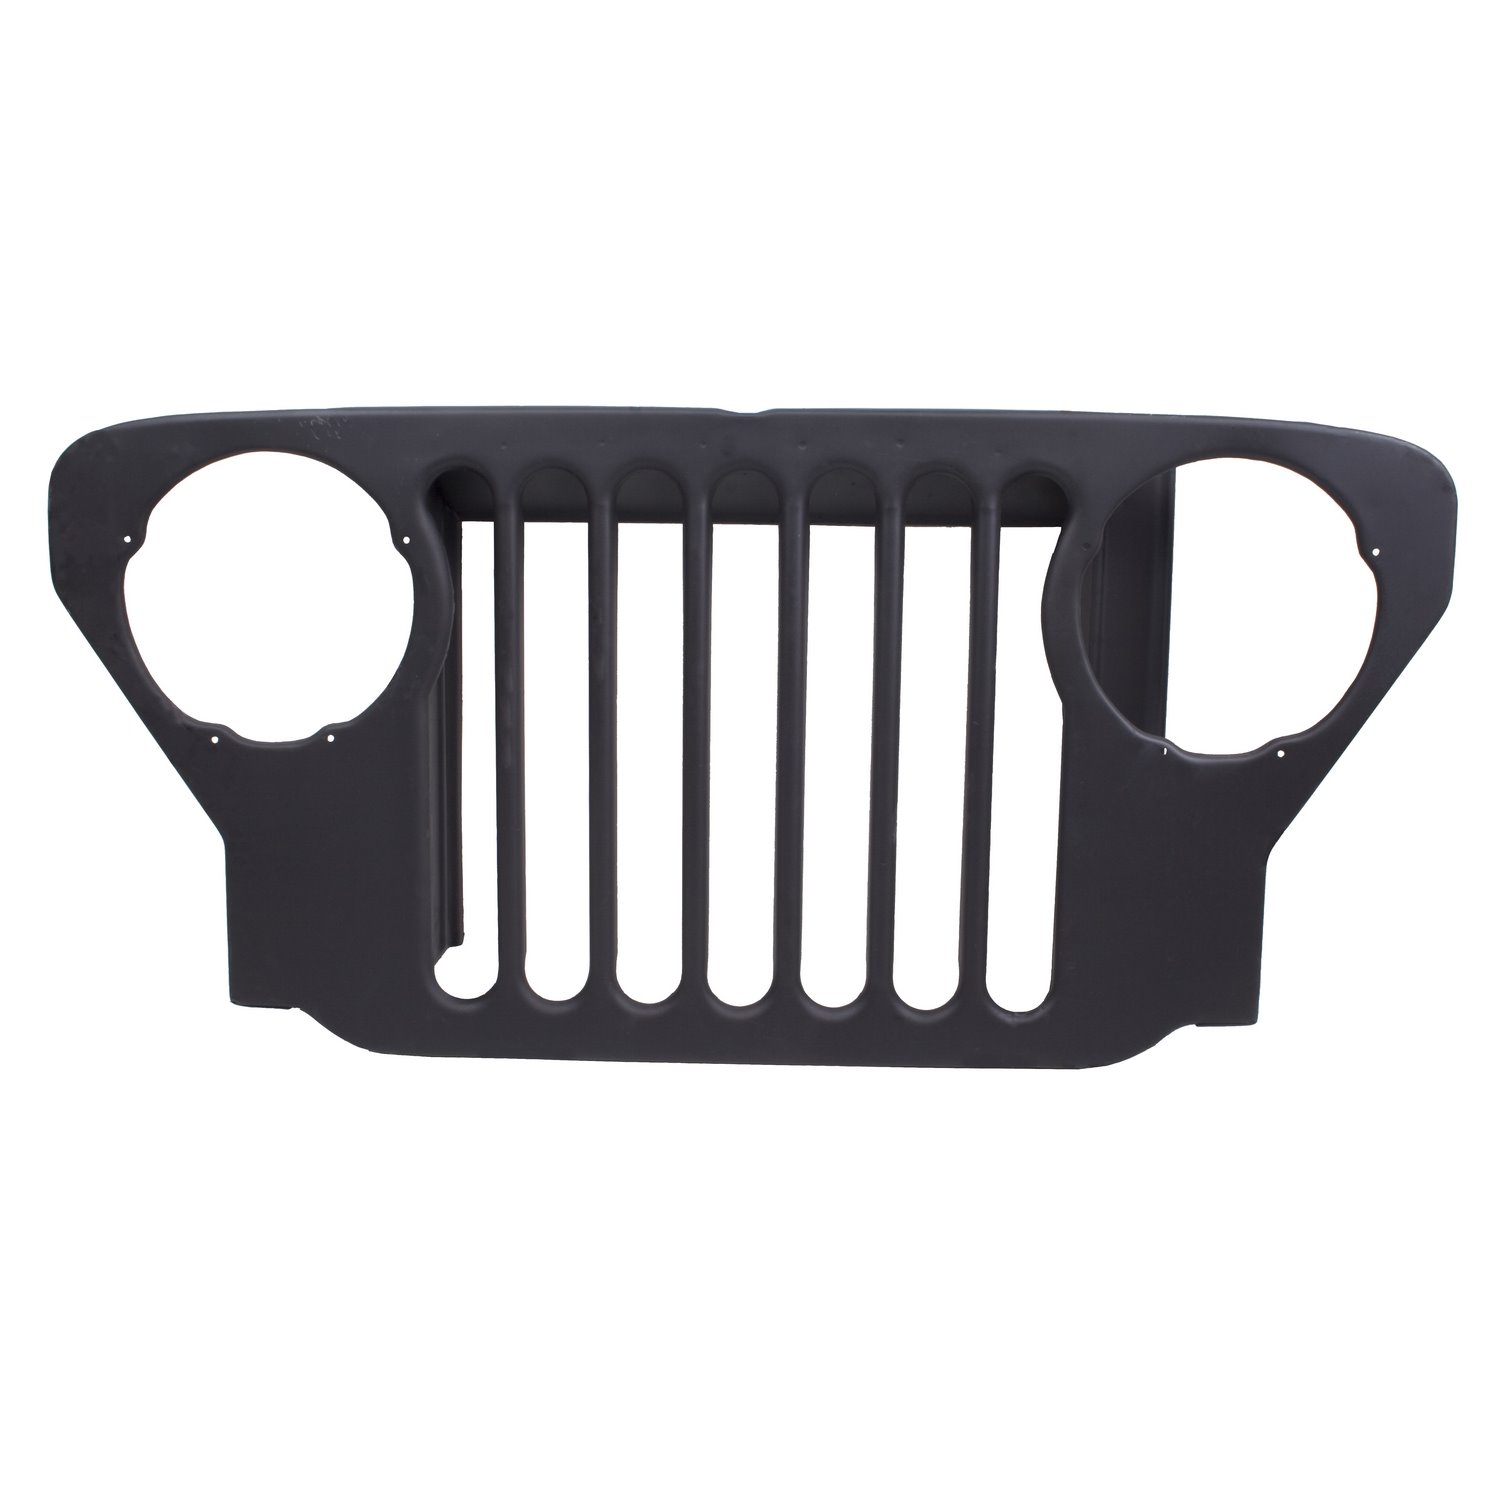 This Mopar licensed steel reproduction grille from Omix-ADA fits 49-53 Willys CJ3A.